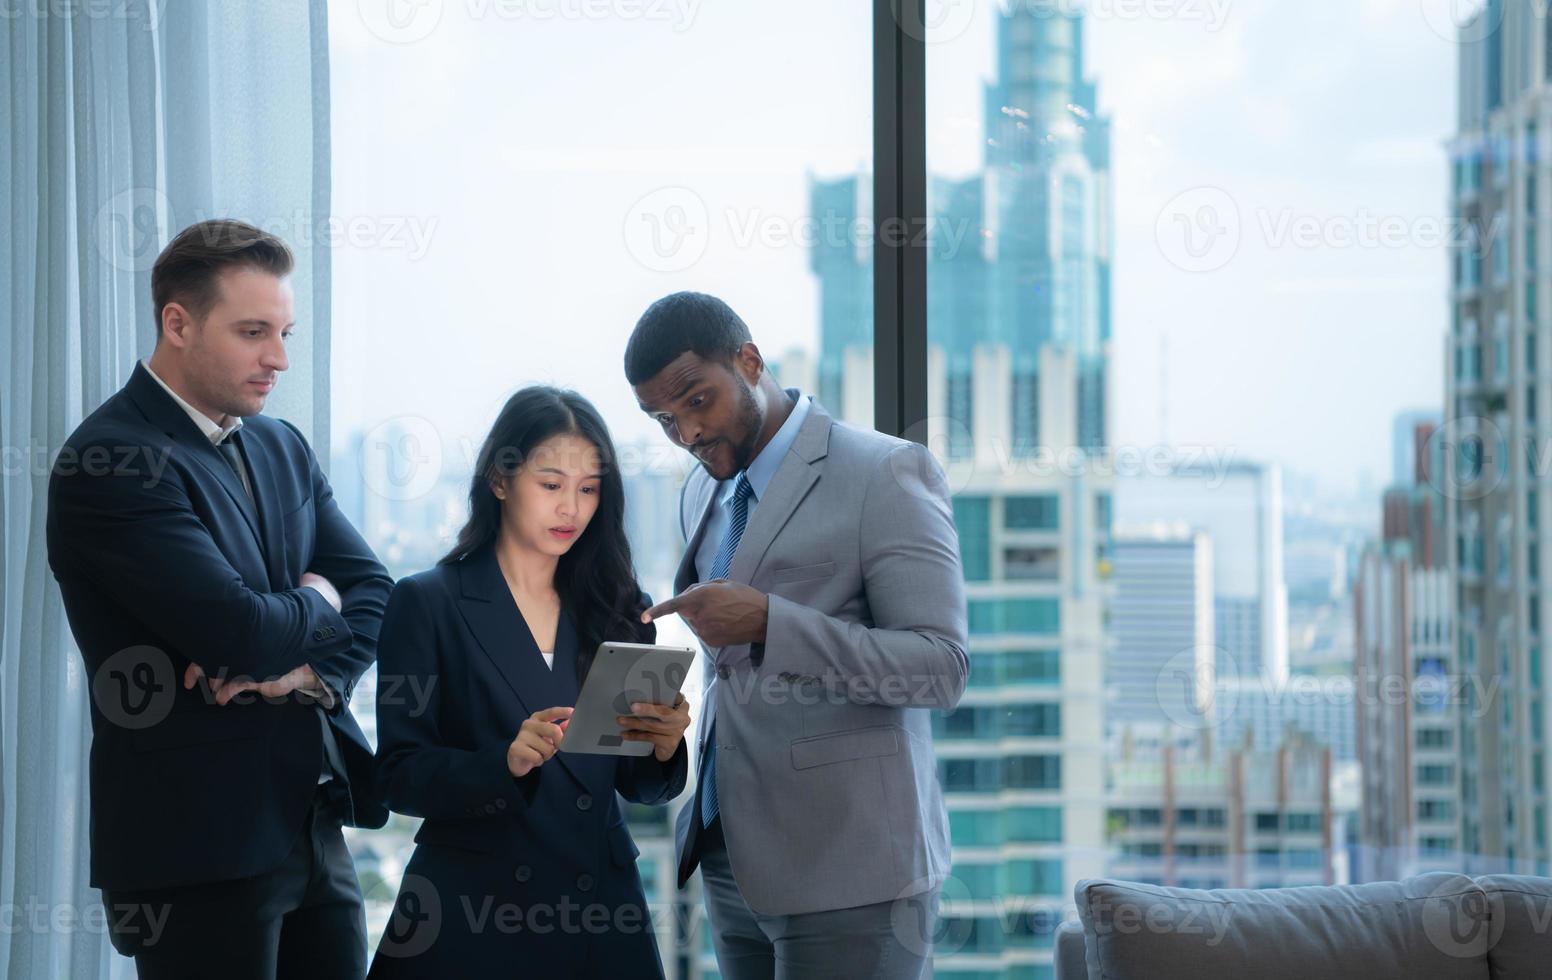 When a group of new businessmen get good news about projects that customers consider accepting proposals. They were overjoyed and delighted with such good news as they sit and rested in the office photo